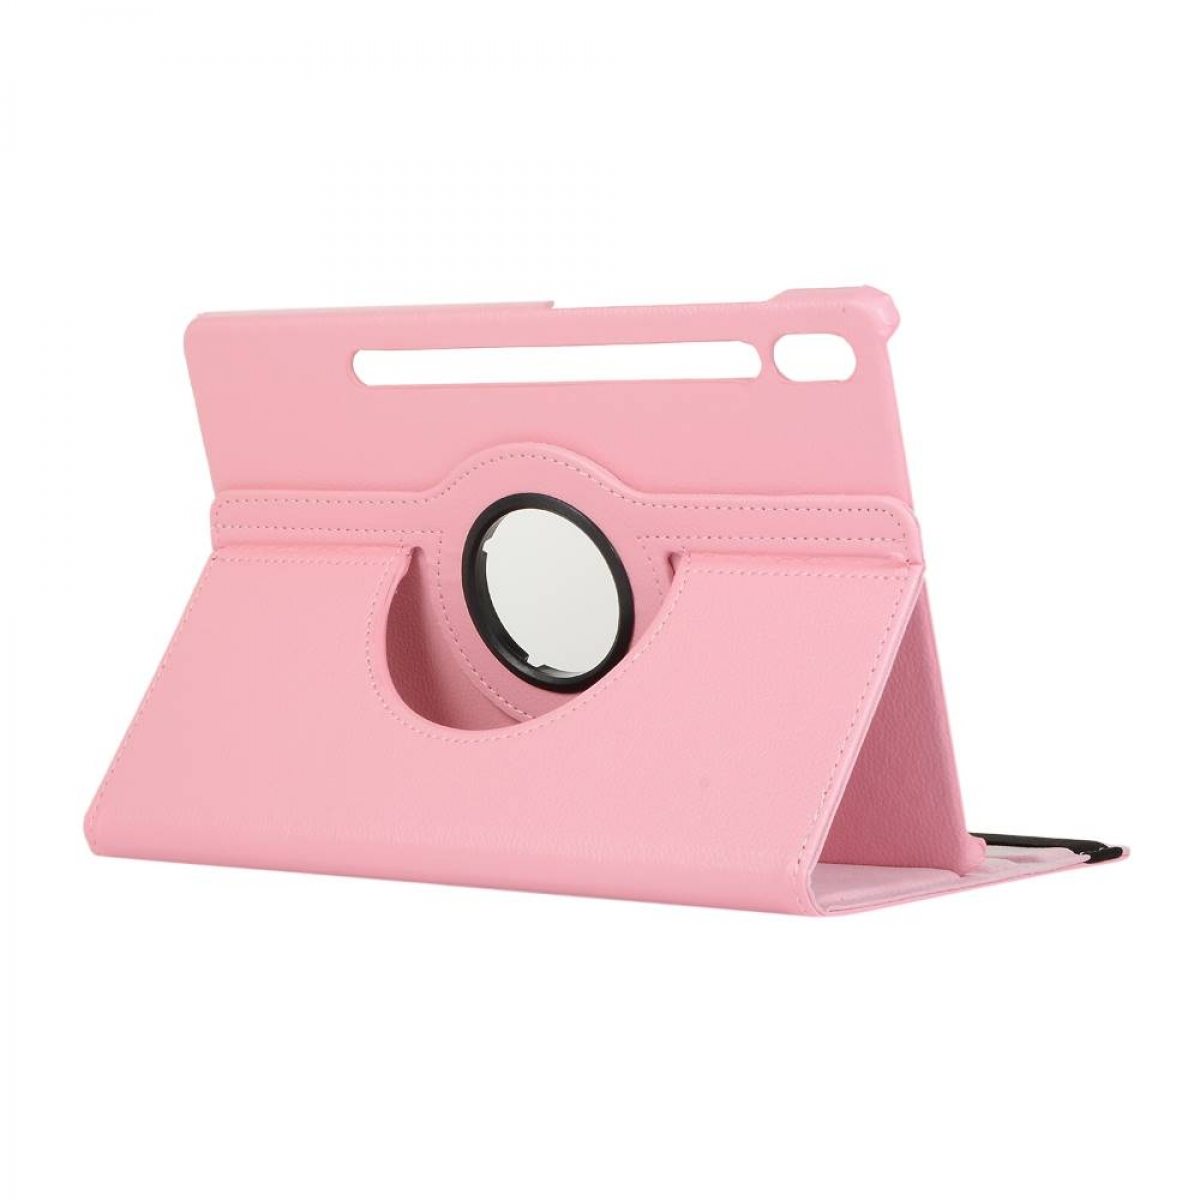 Tablethülle Samsung Full 360 Leather, Synthetic Cover für Hell-Pink Drehbar CASEONLINE